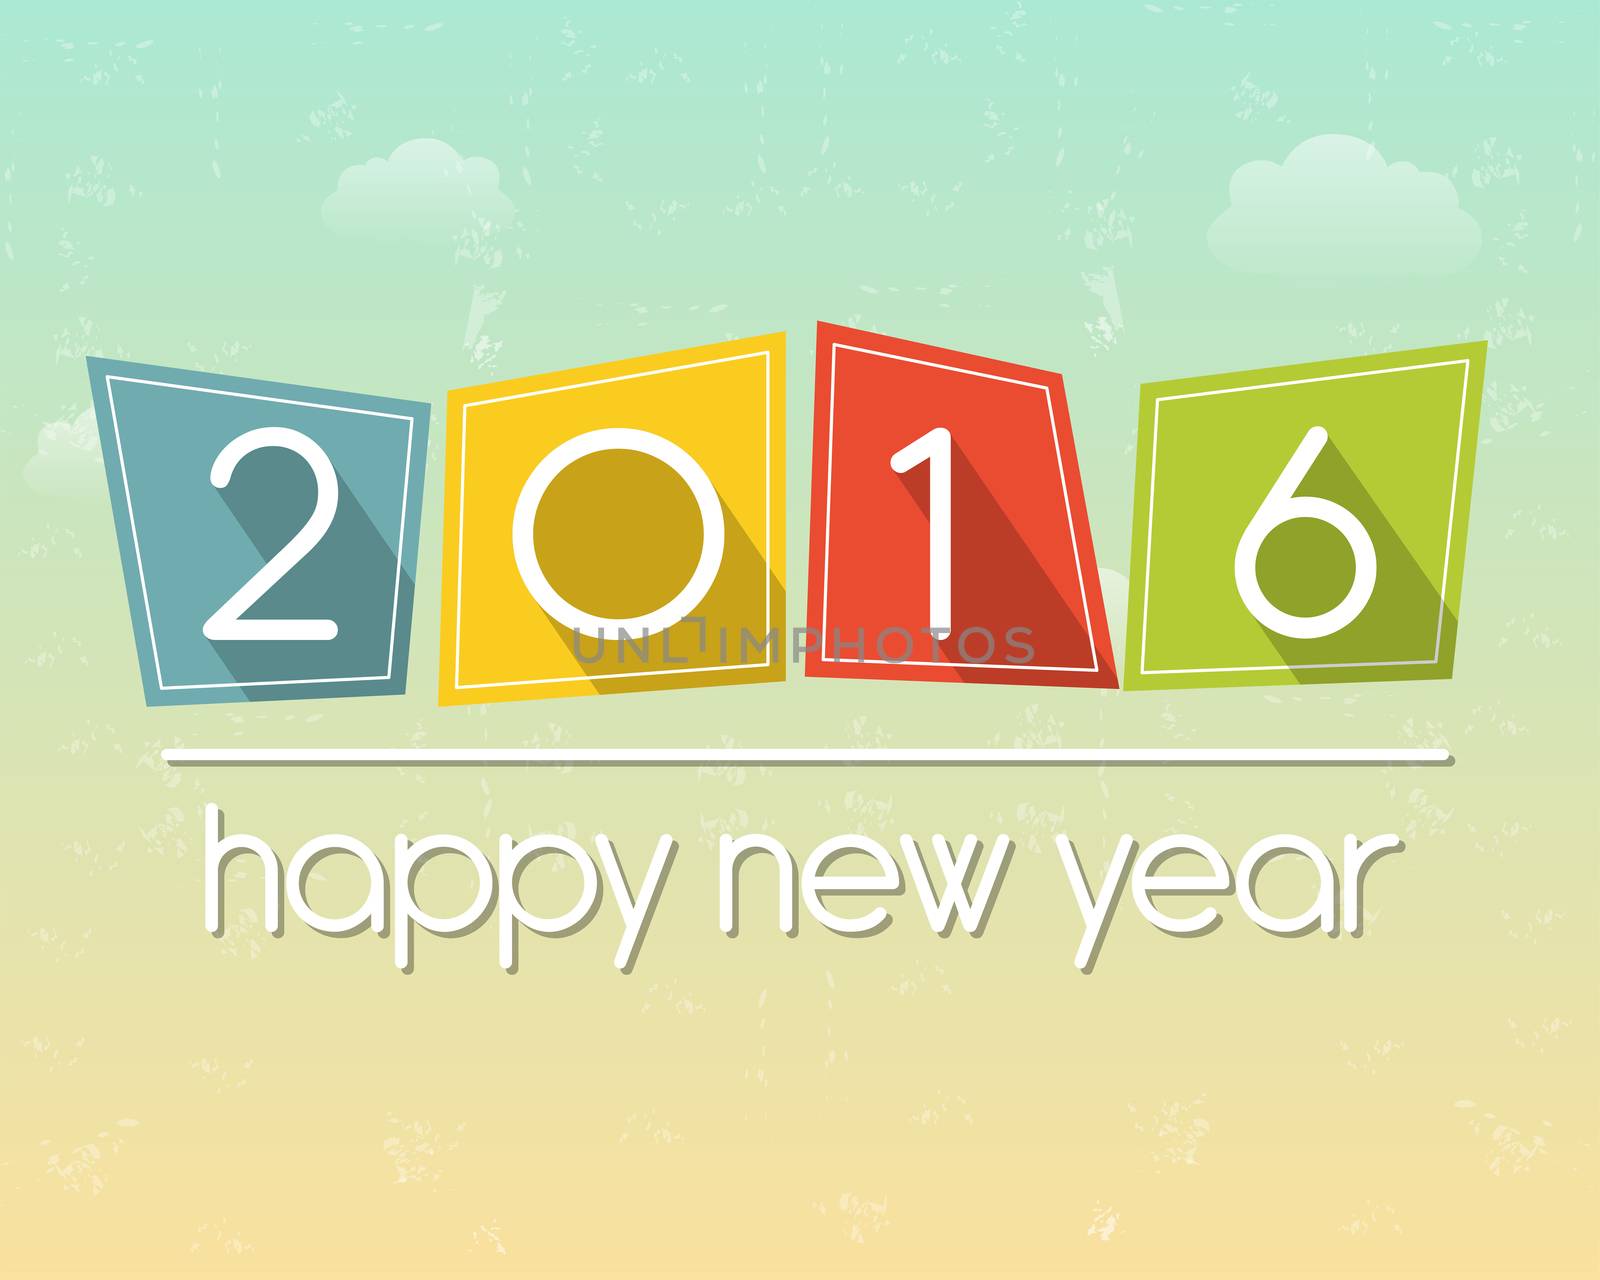 happy new year 2016 in flat colored tablets over cloudy sky background, holiday seasonal concept